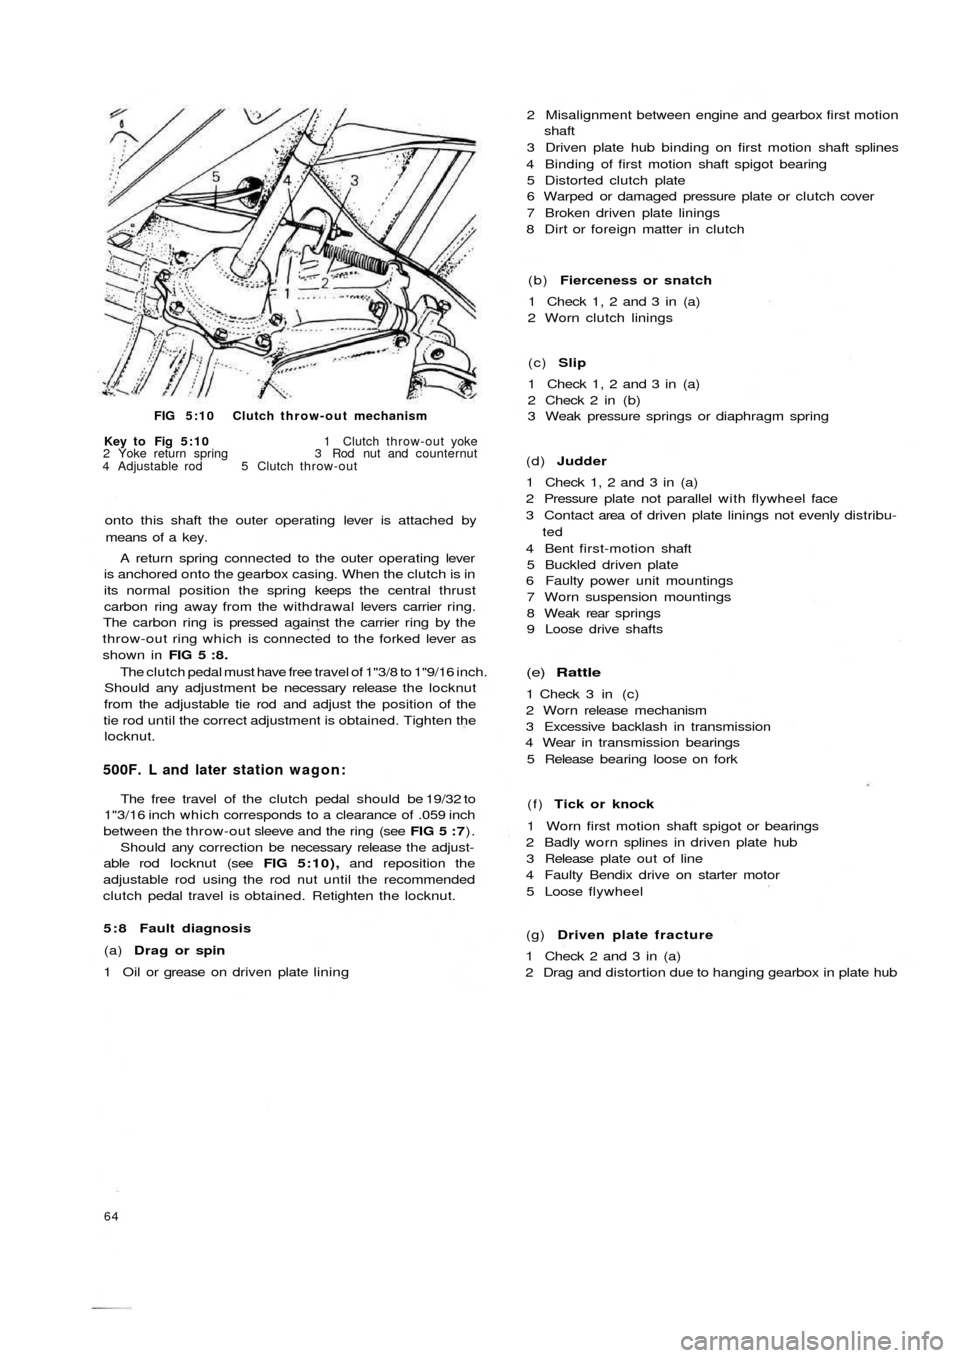 FIAT 500 1964 1.G Workshop Manual FIG 5:10 Clutch throw-out mechanism
Key to  Fig  5:10 1 Clutch throw-out yoke
2 Yoke return spring 3 Rod nut and counternut
4 Adjustable rod  5  Clutch throw-out
onto this shaft the outer operating le